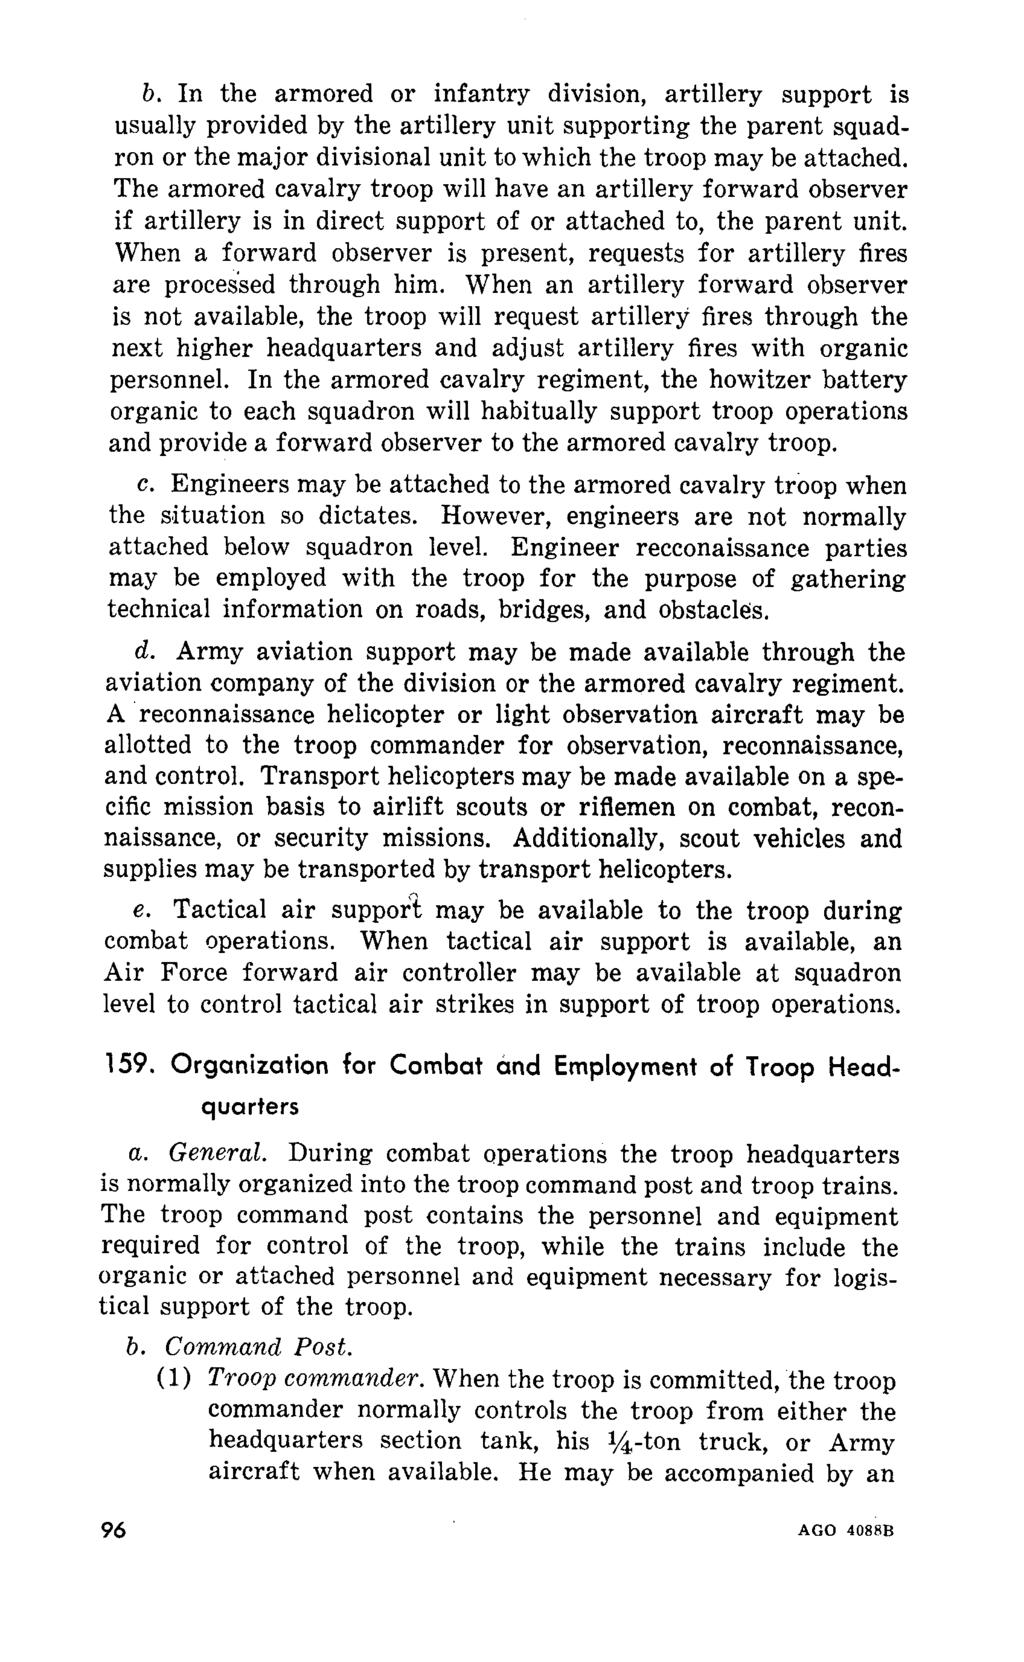 b. In the armored or infantry division, artillery support is usually provided by the artillery unit supporting the parent squadron or the major divisional unit to which the troop may be attached.